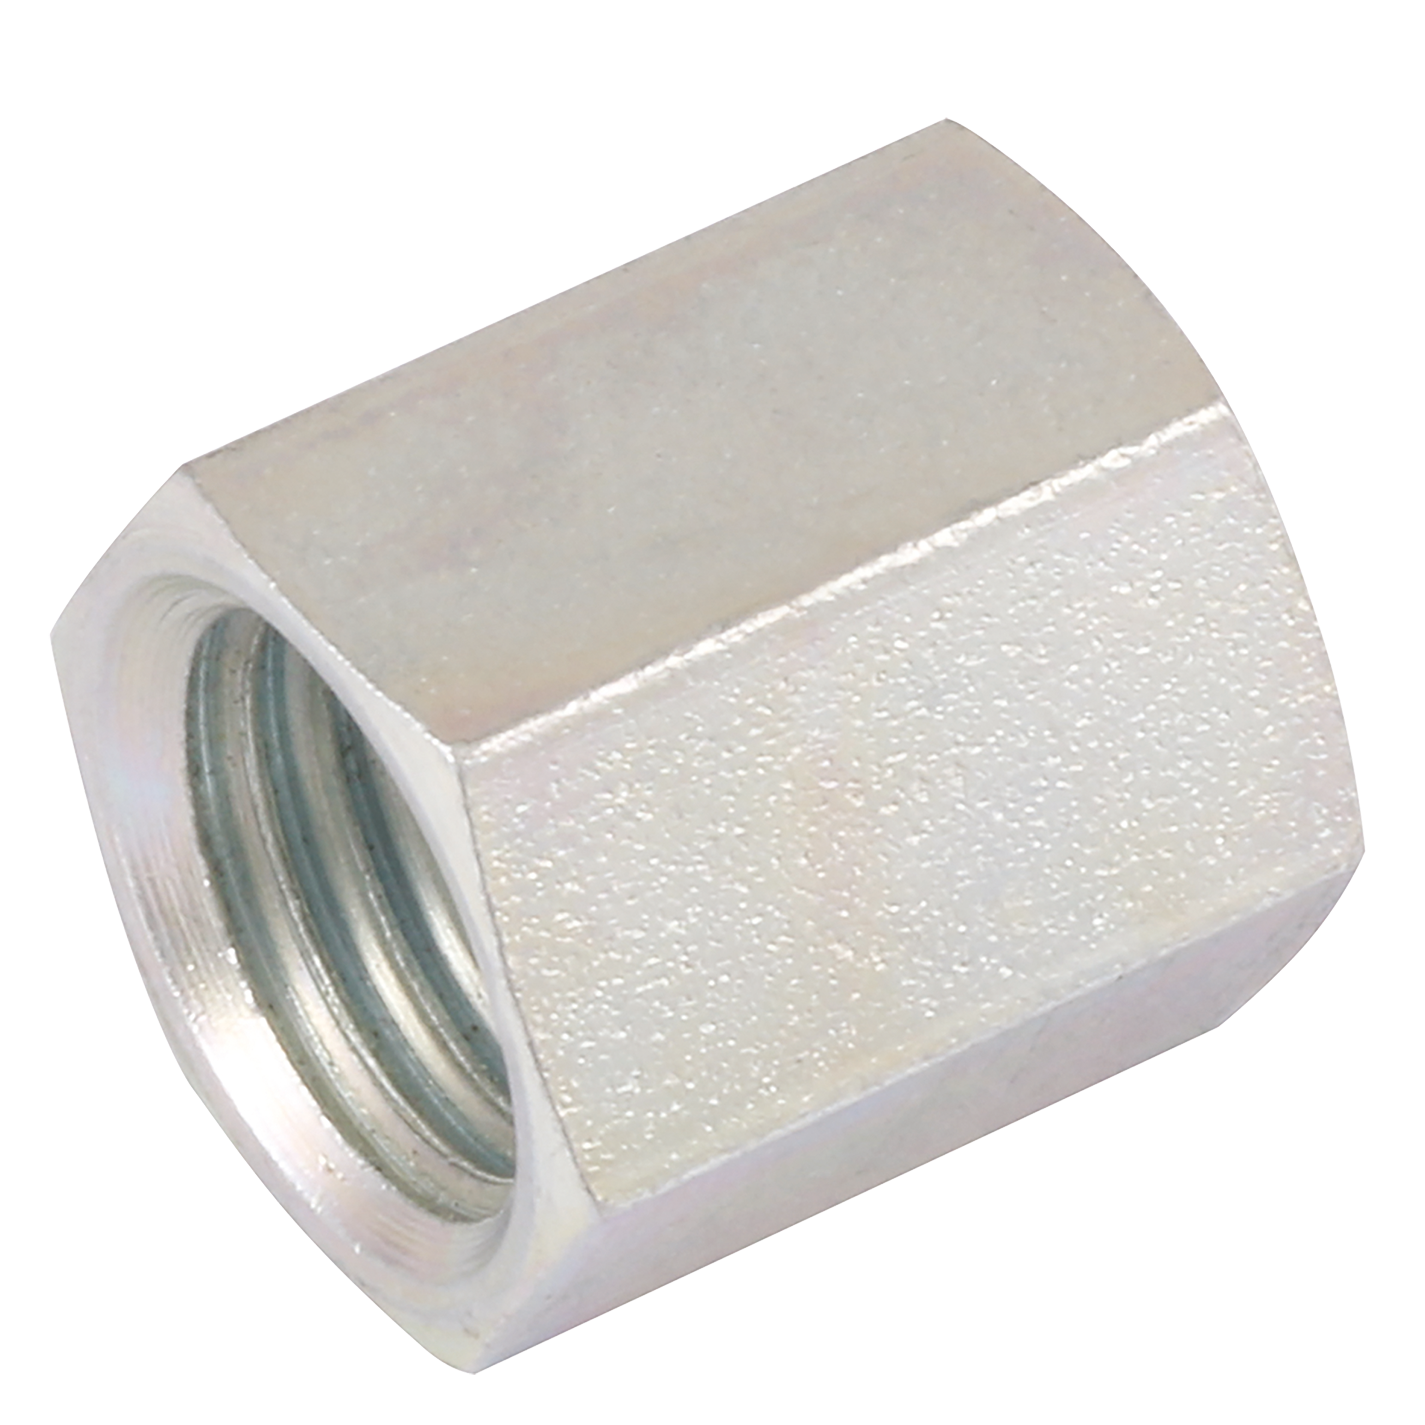 7/8" JIC FLARE NUT TO SUIT 5/8" TUBE OD